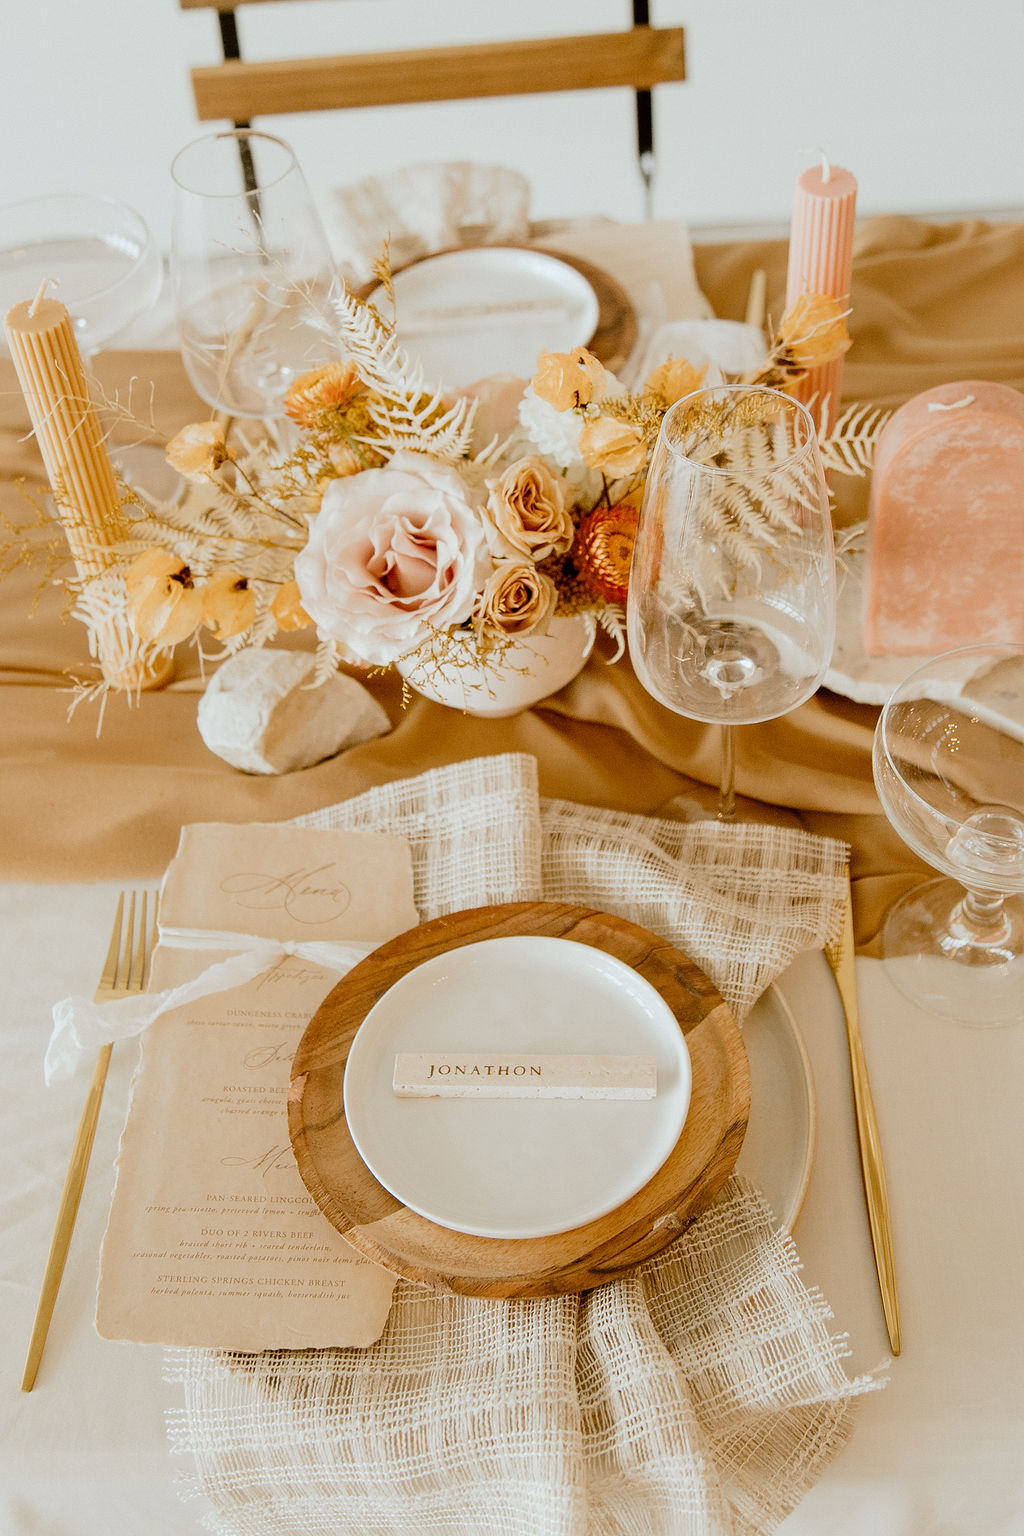 Boho reception table decor with wood, burlap and paper finishes